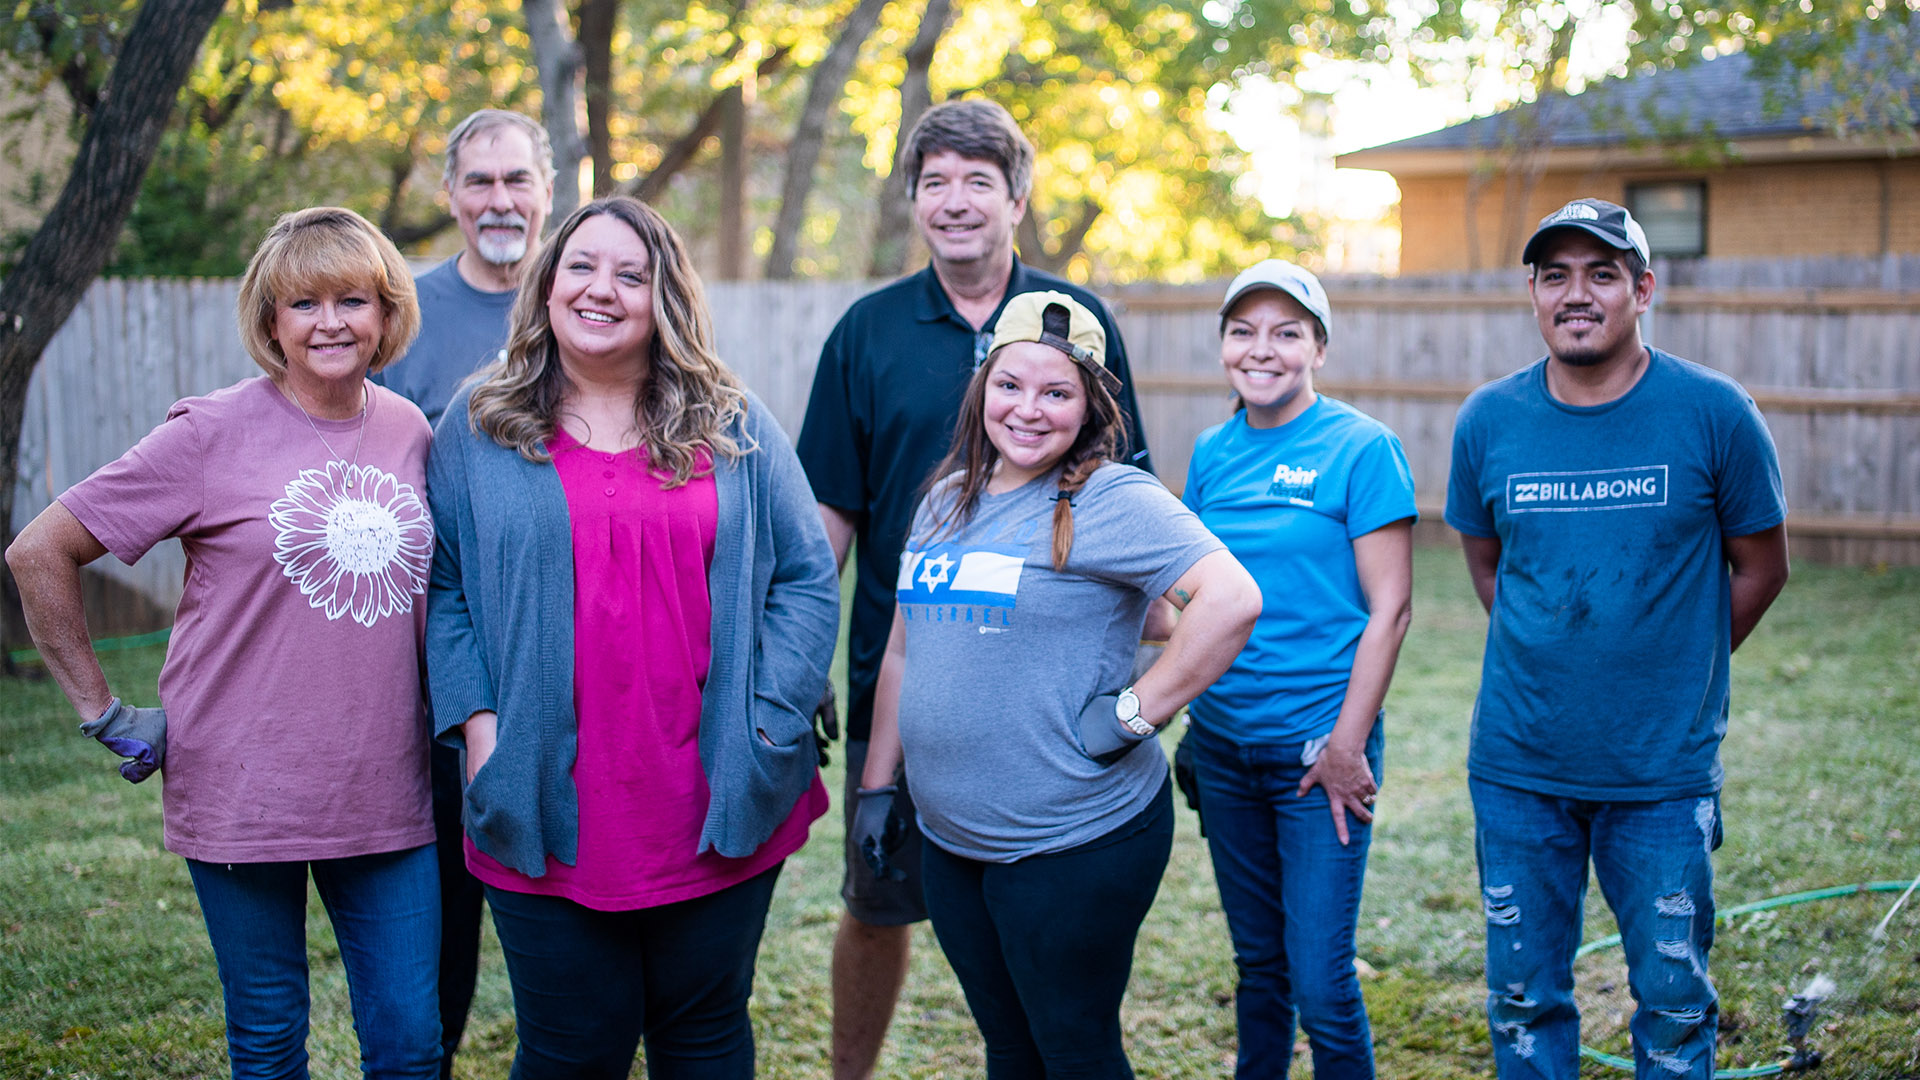 The Point the Way team helped revitalize a backyard and a life.